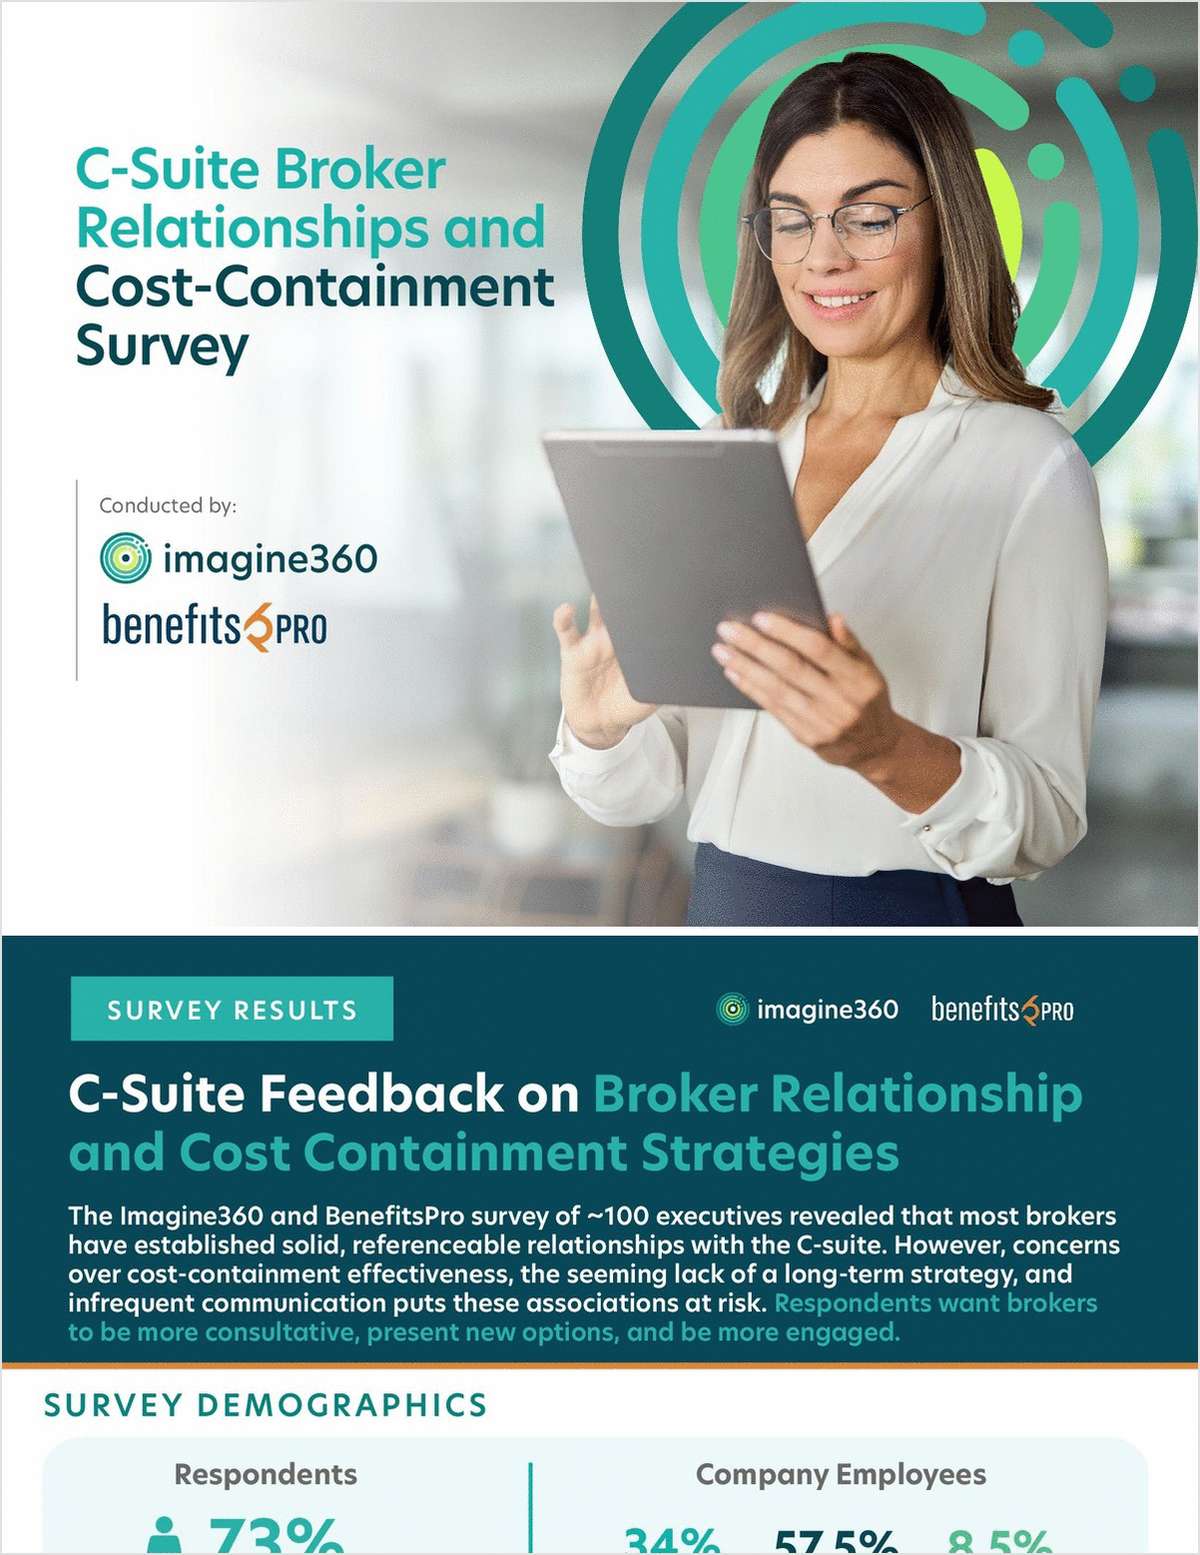 C-Suite Broker Relationships and Cost-Containment Survey Results link